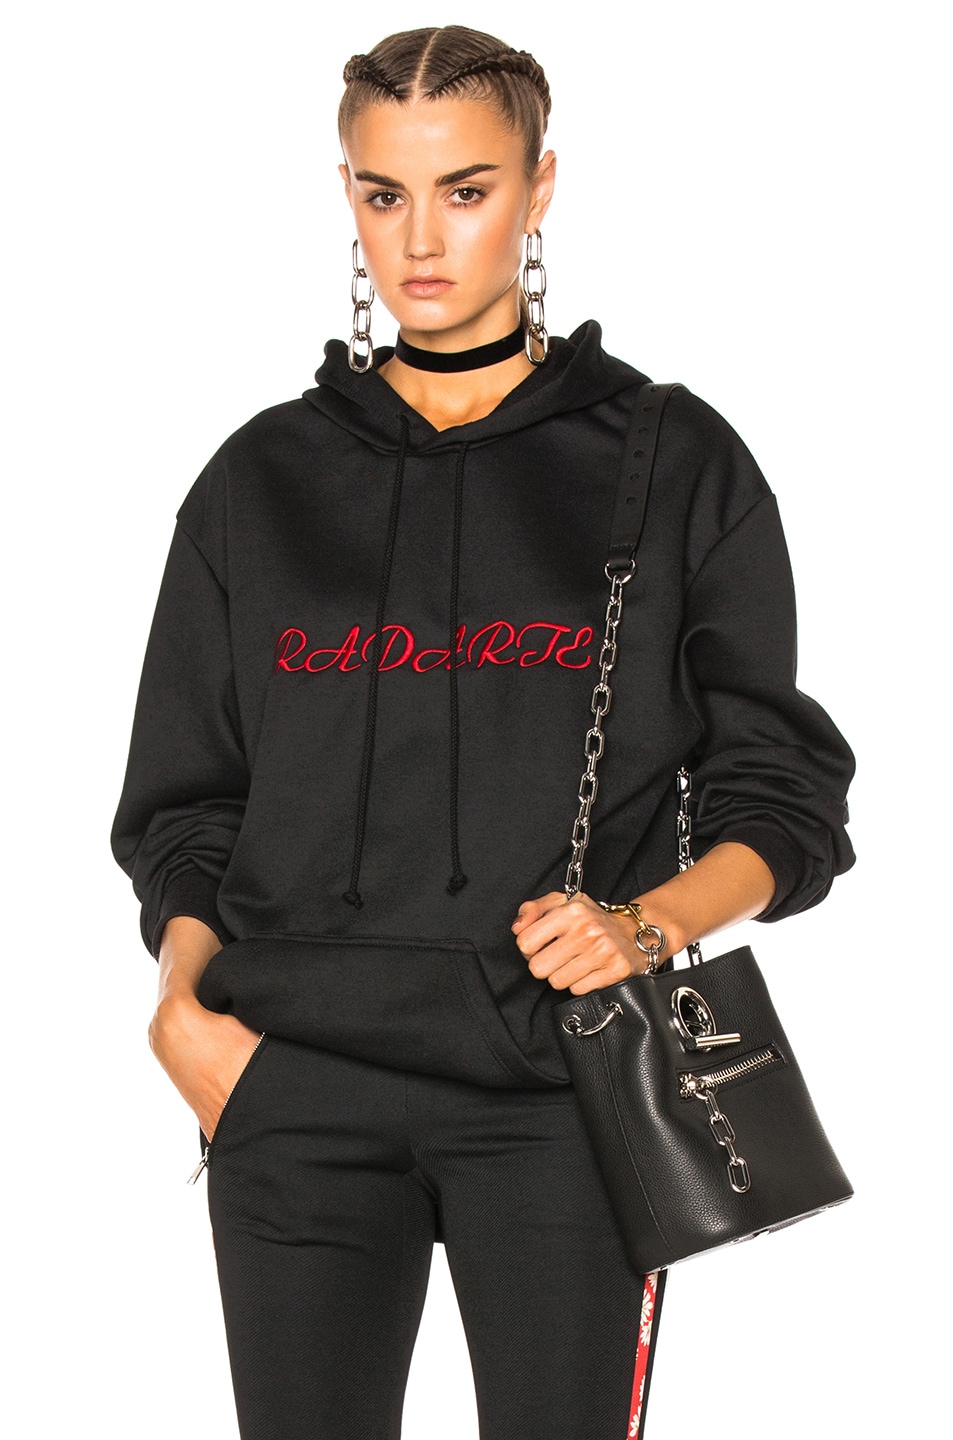 Image 1 of Rodarte LA Embroidery Oversized Hoodie in Black with Red Text